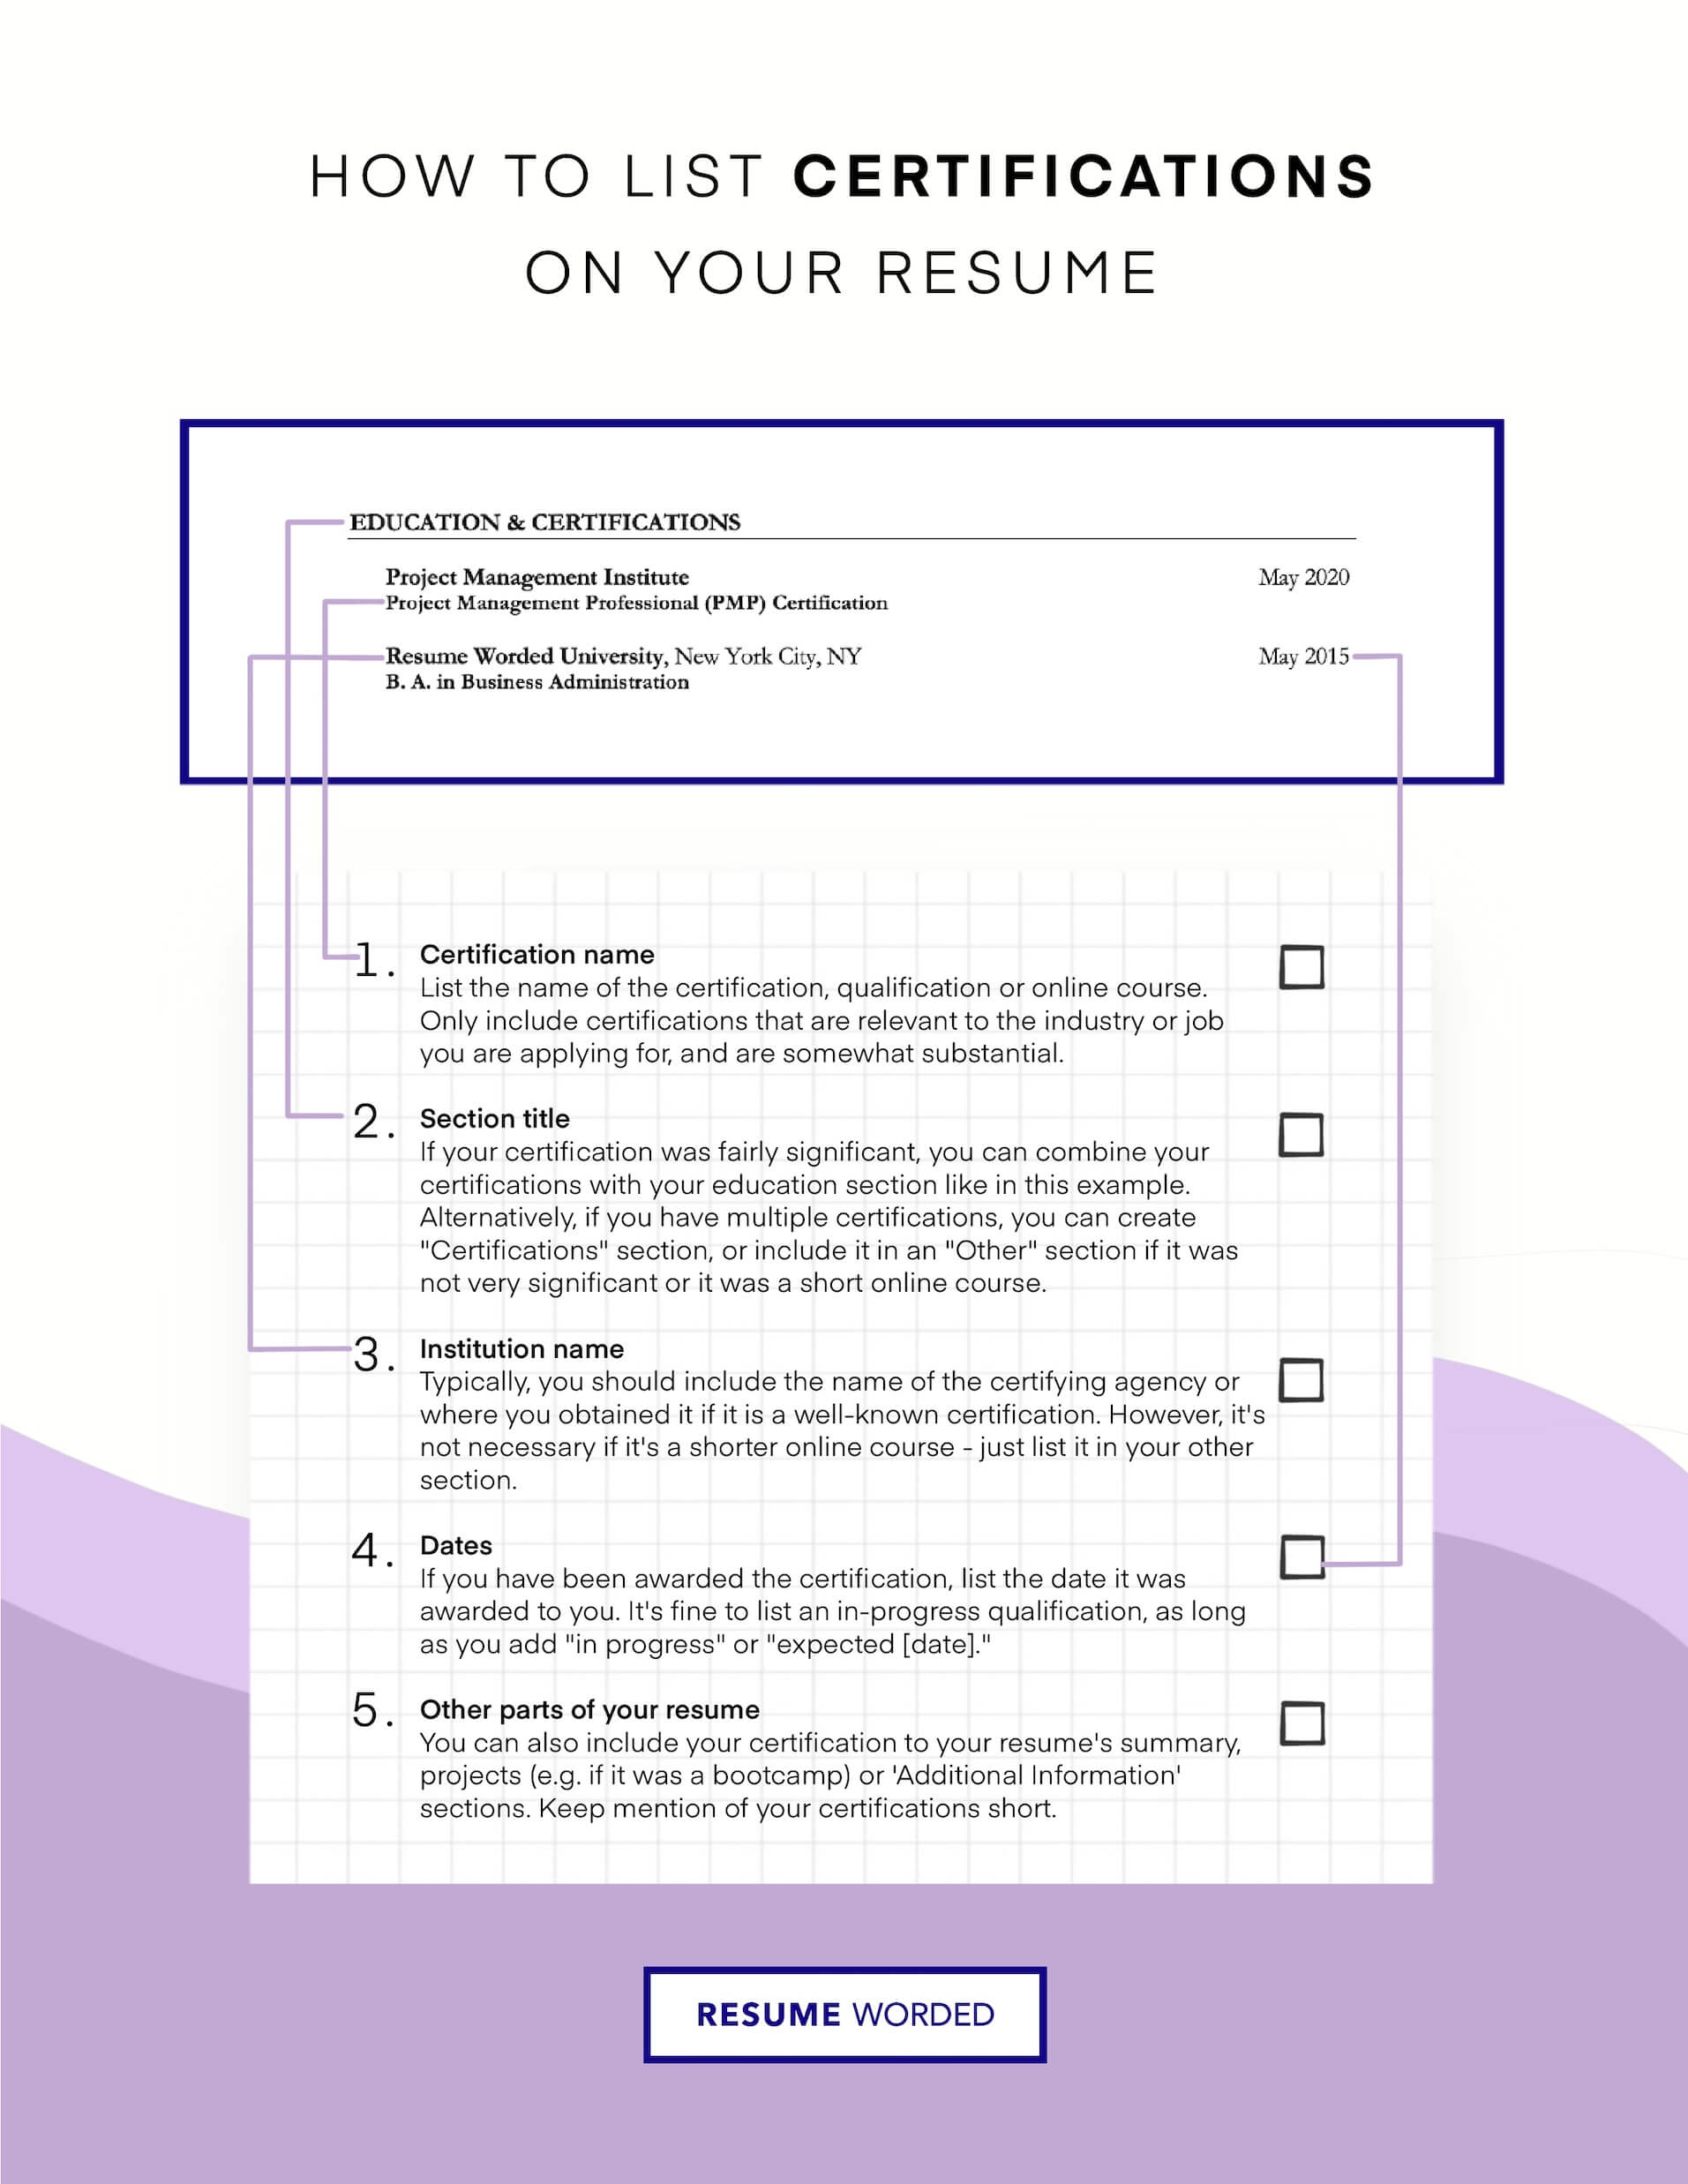 Include any relevant certification, such as an HVAC certificate. - Maintenance Technician Resume